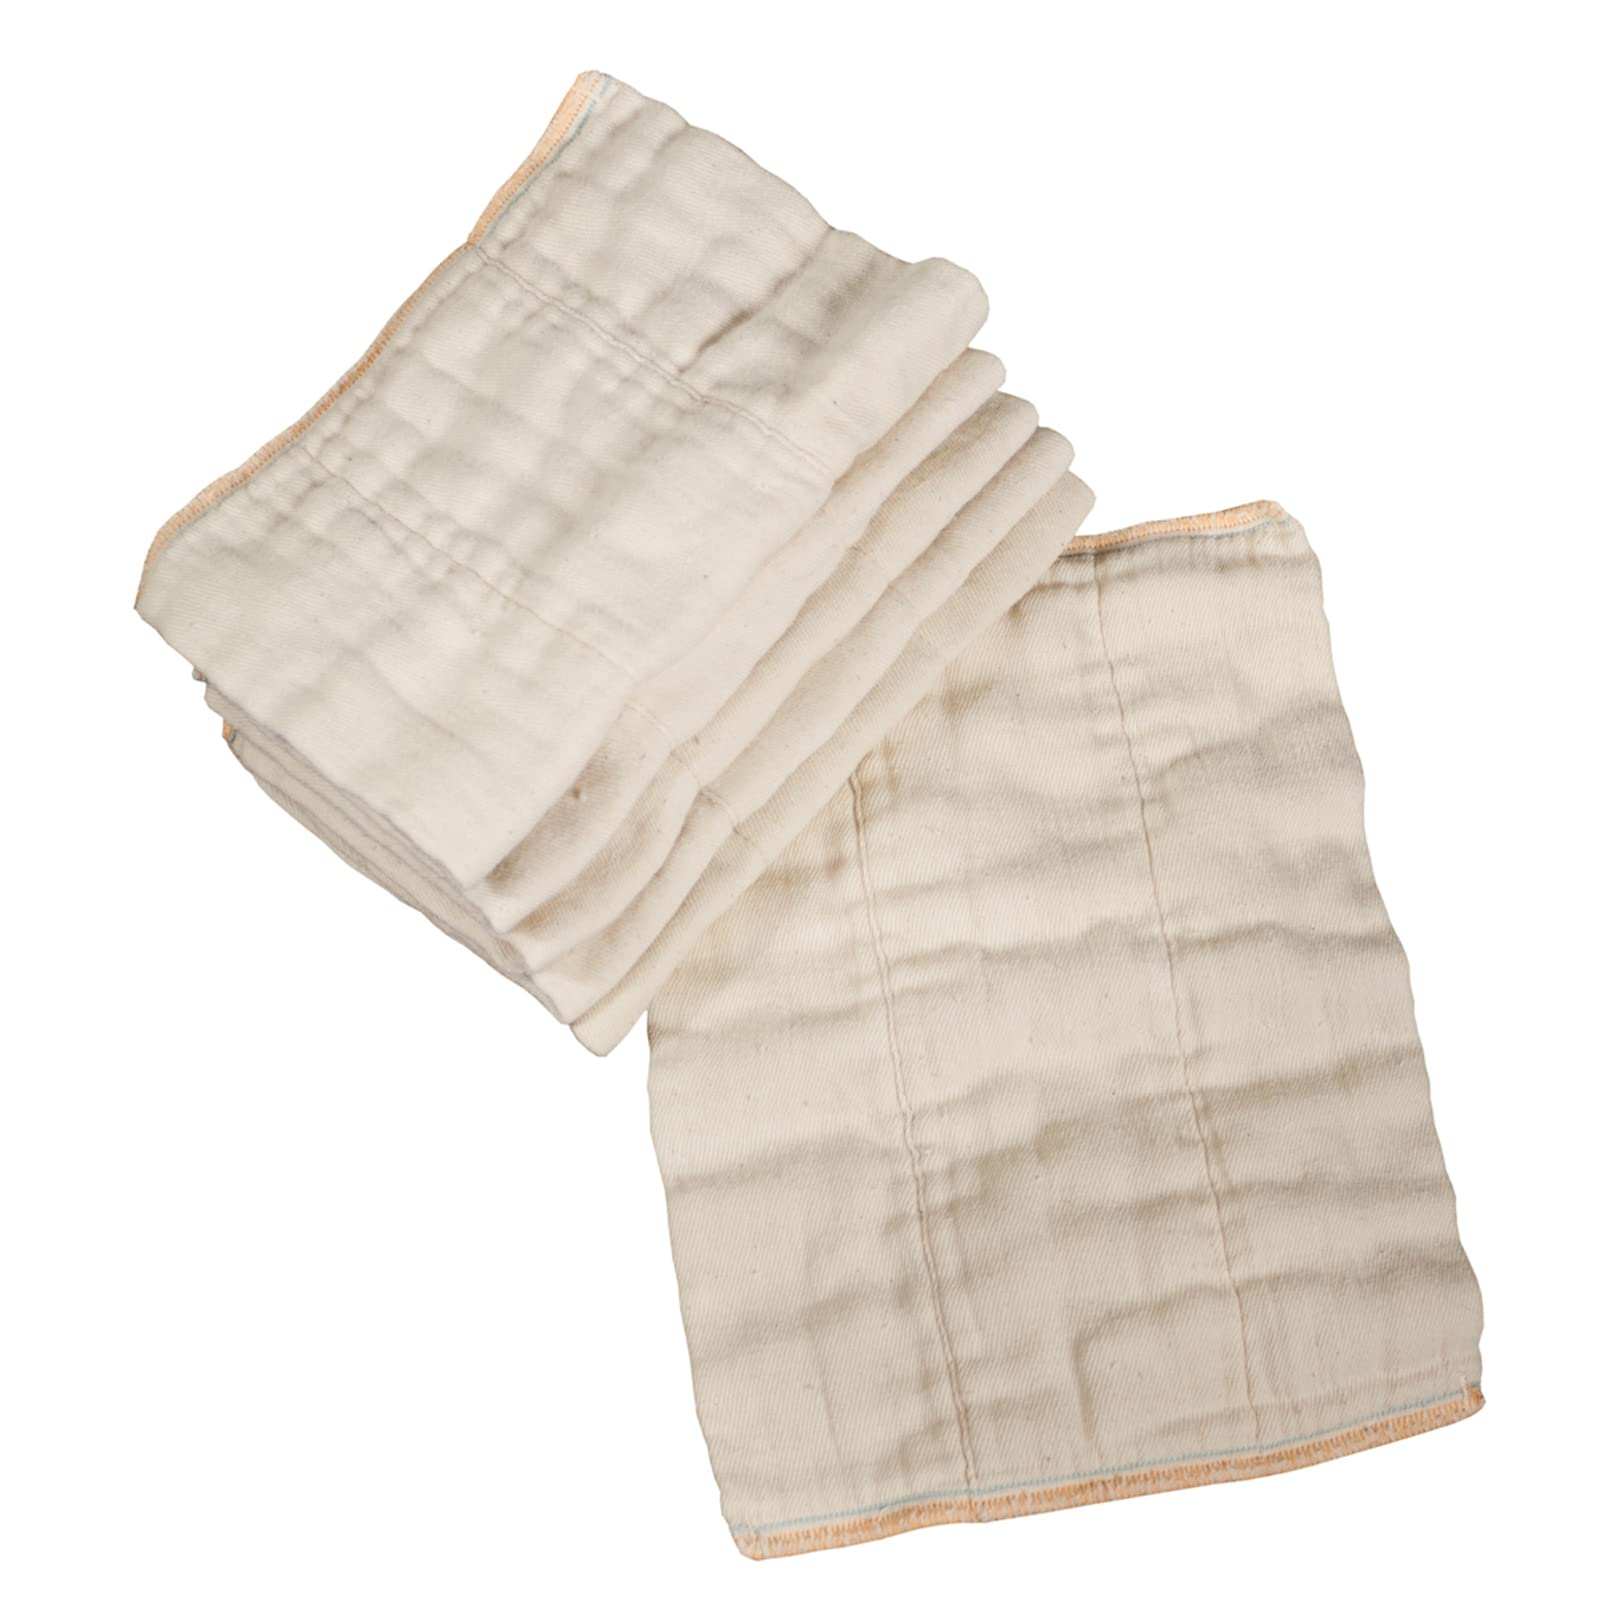 OsoCozy Unbleached Prefold Cloth Diapers – Soft and Absorbent Baby Diapers Made of 100% Unbleached Cotton - 10